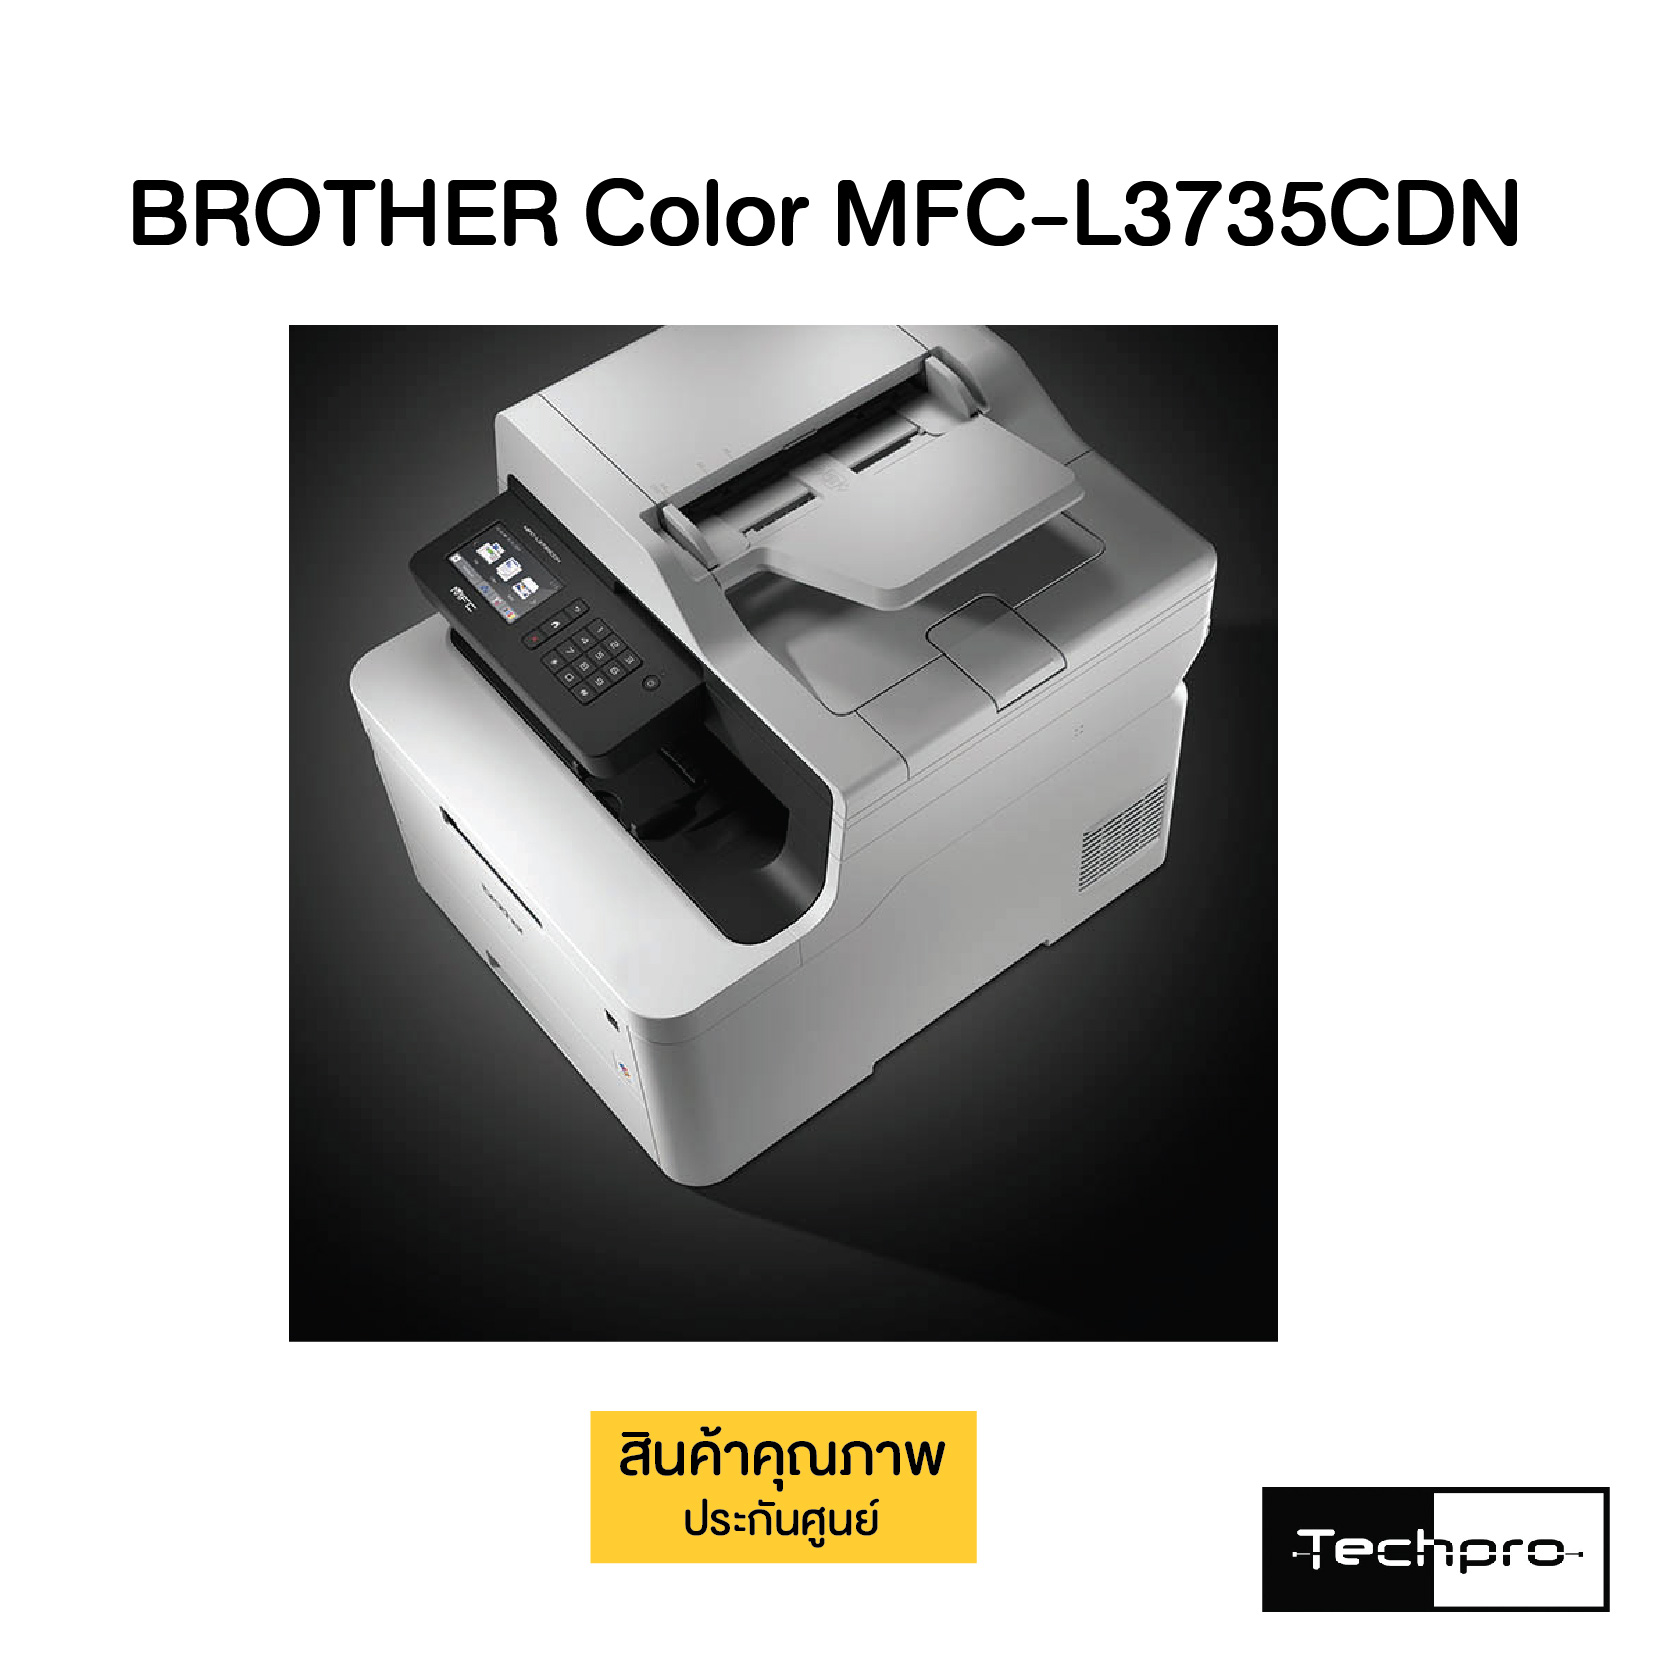 BROTHER Color MFC-L3735CDN - Techpro